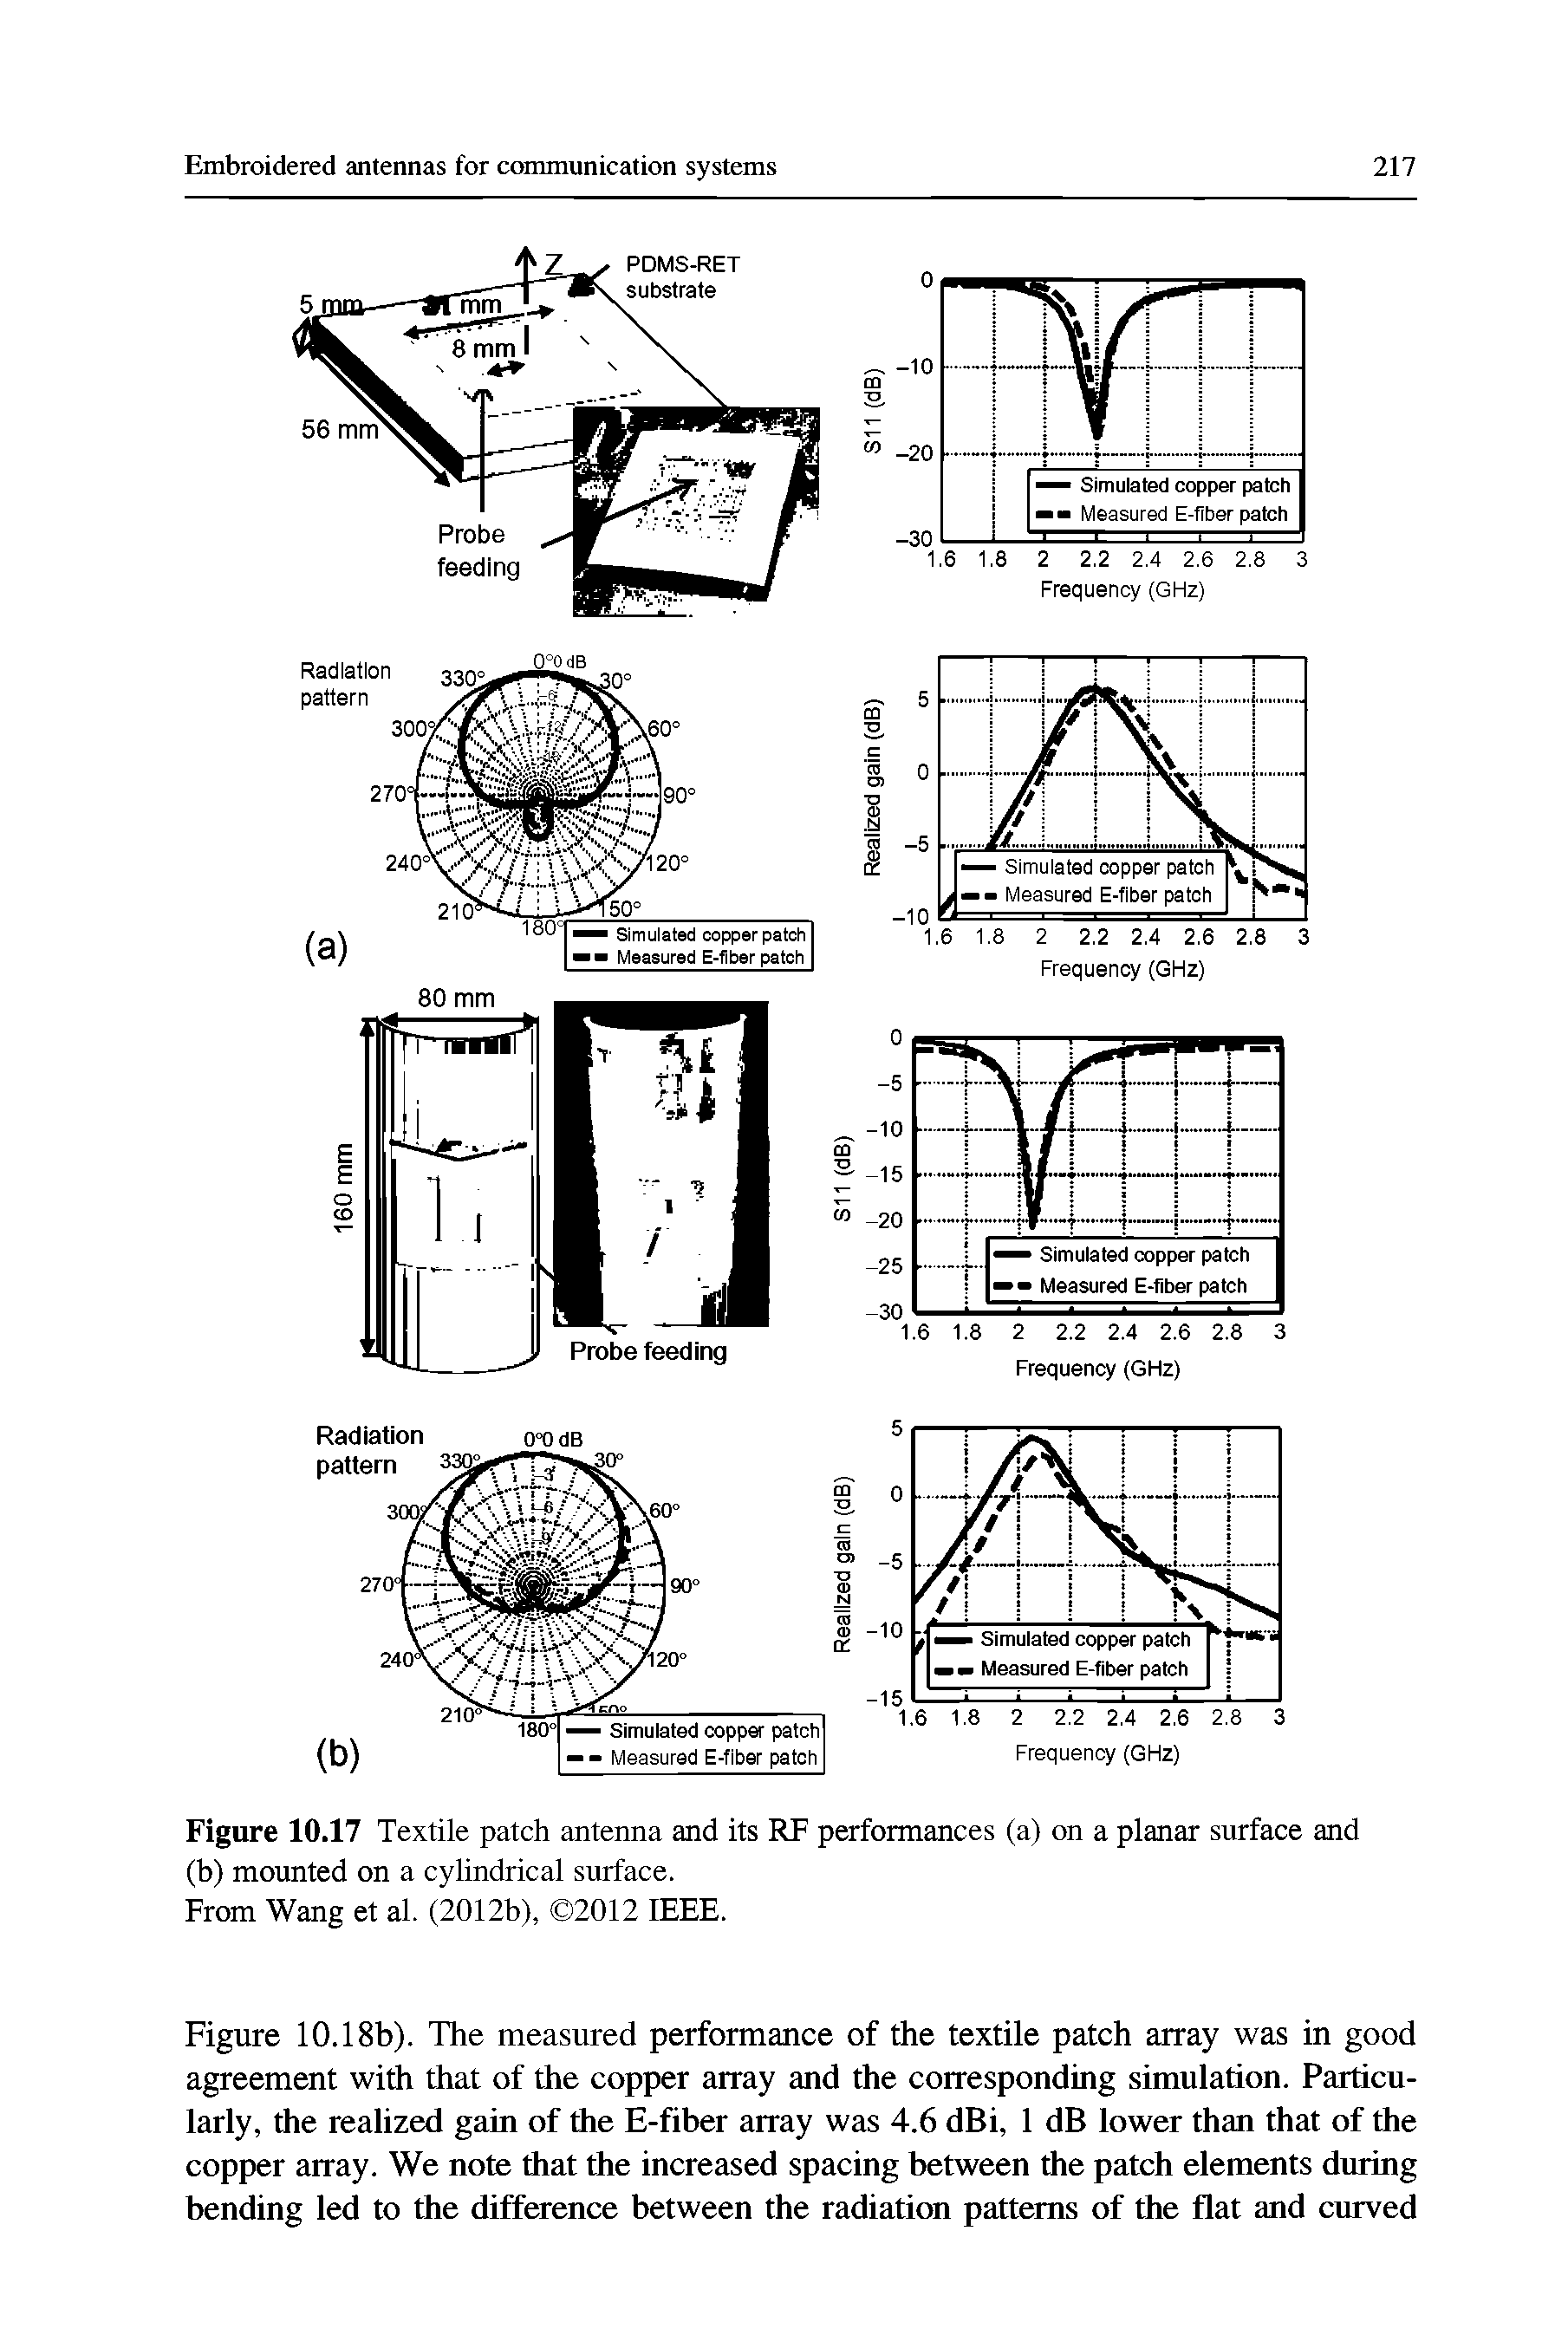 Figure 10.17 Textile patch antenna and its RF performances (a) on a planar surface and (b) mounted on a cylindrical surface.